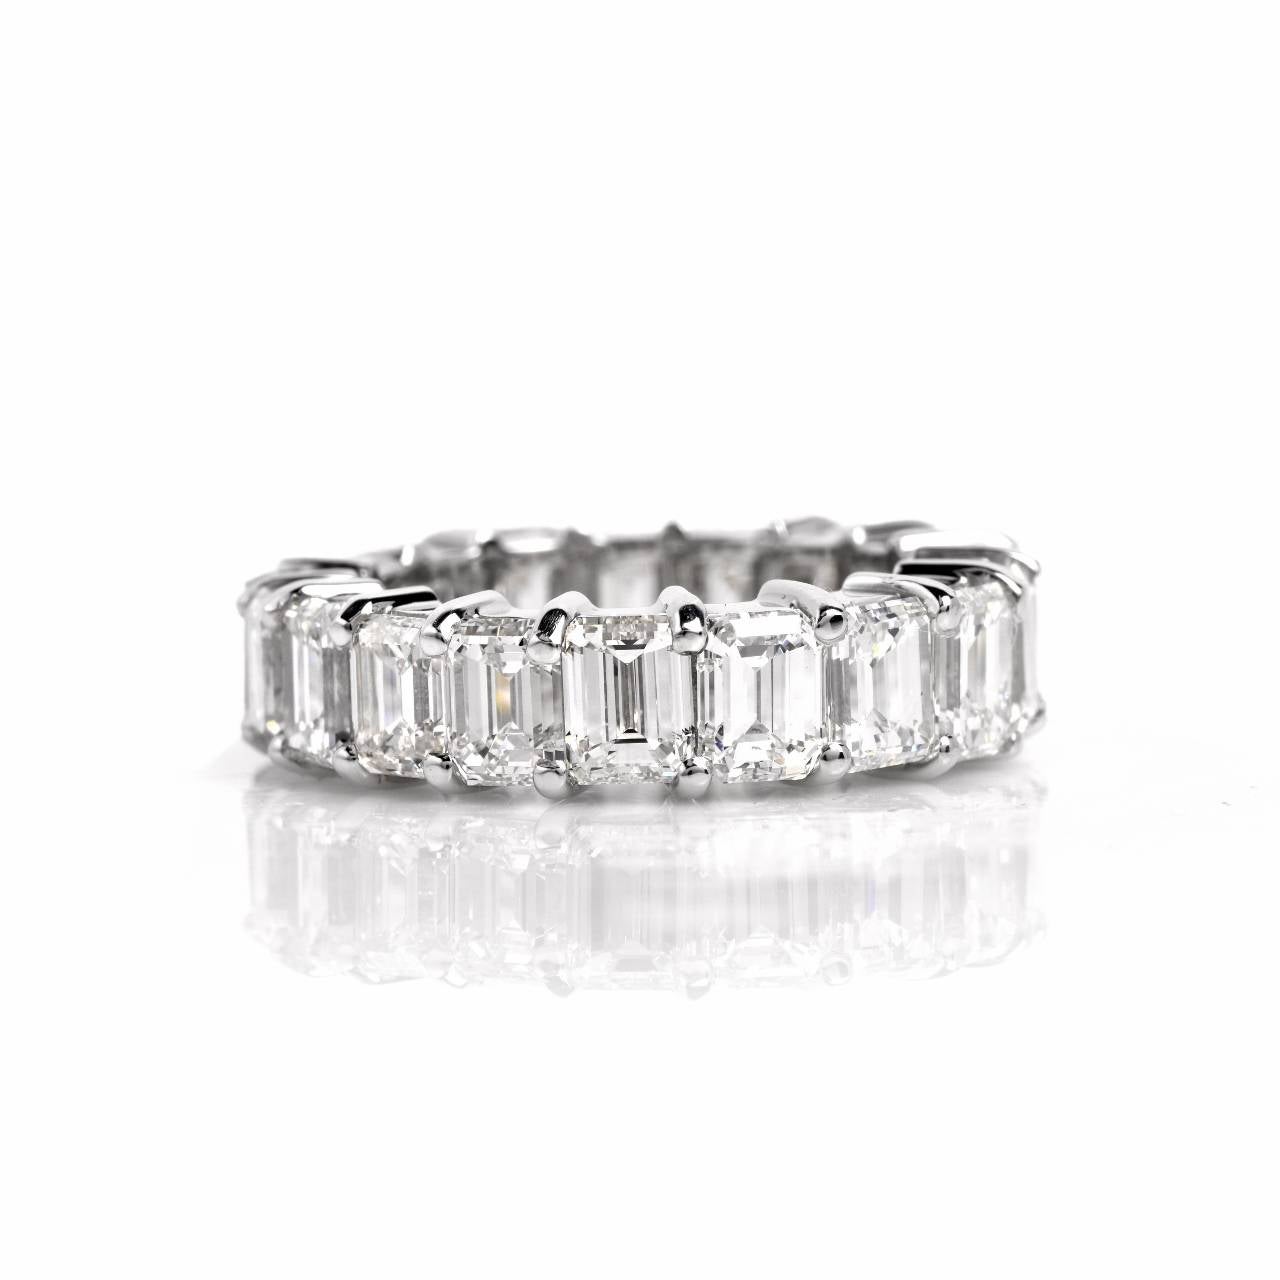 This impressive estate eternity band of opulent and sculptural tri-dimensional design is crafted in solid platinum and weighs 10.6 grams. This estate eternity band is adorned with an assemblage of 18 genuine emerald-cut  diamonds, cumulatively